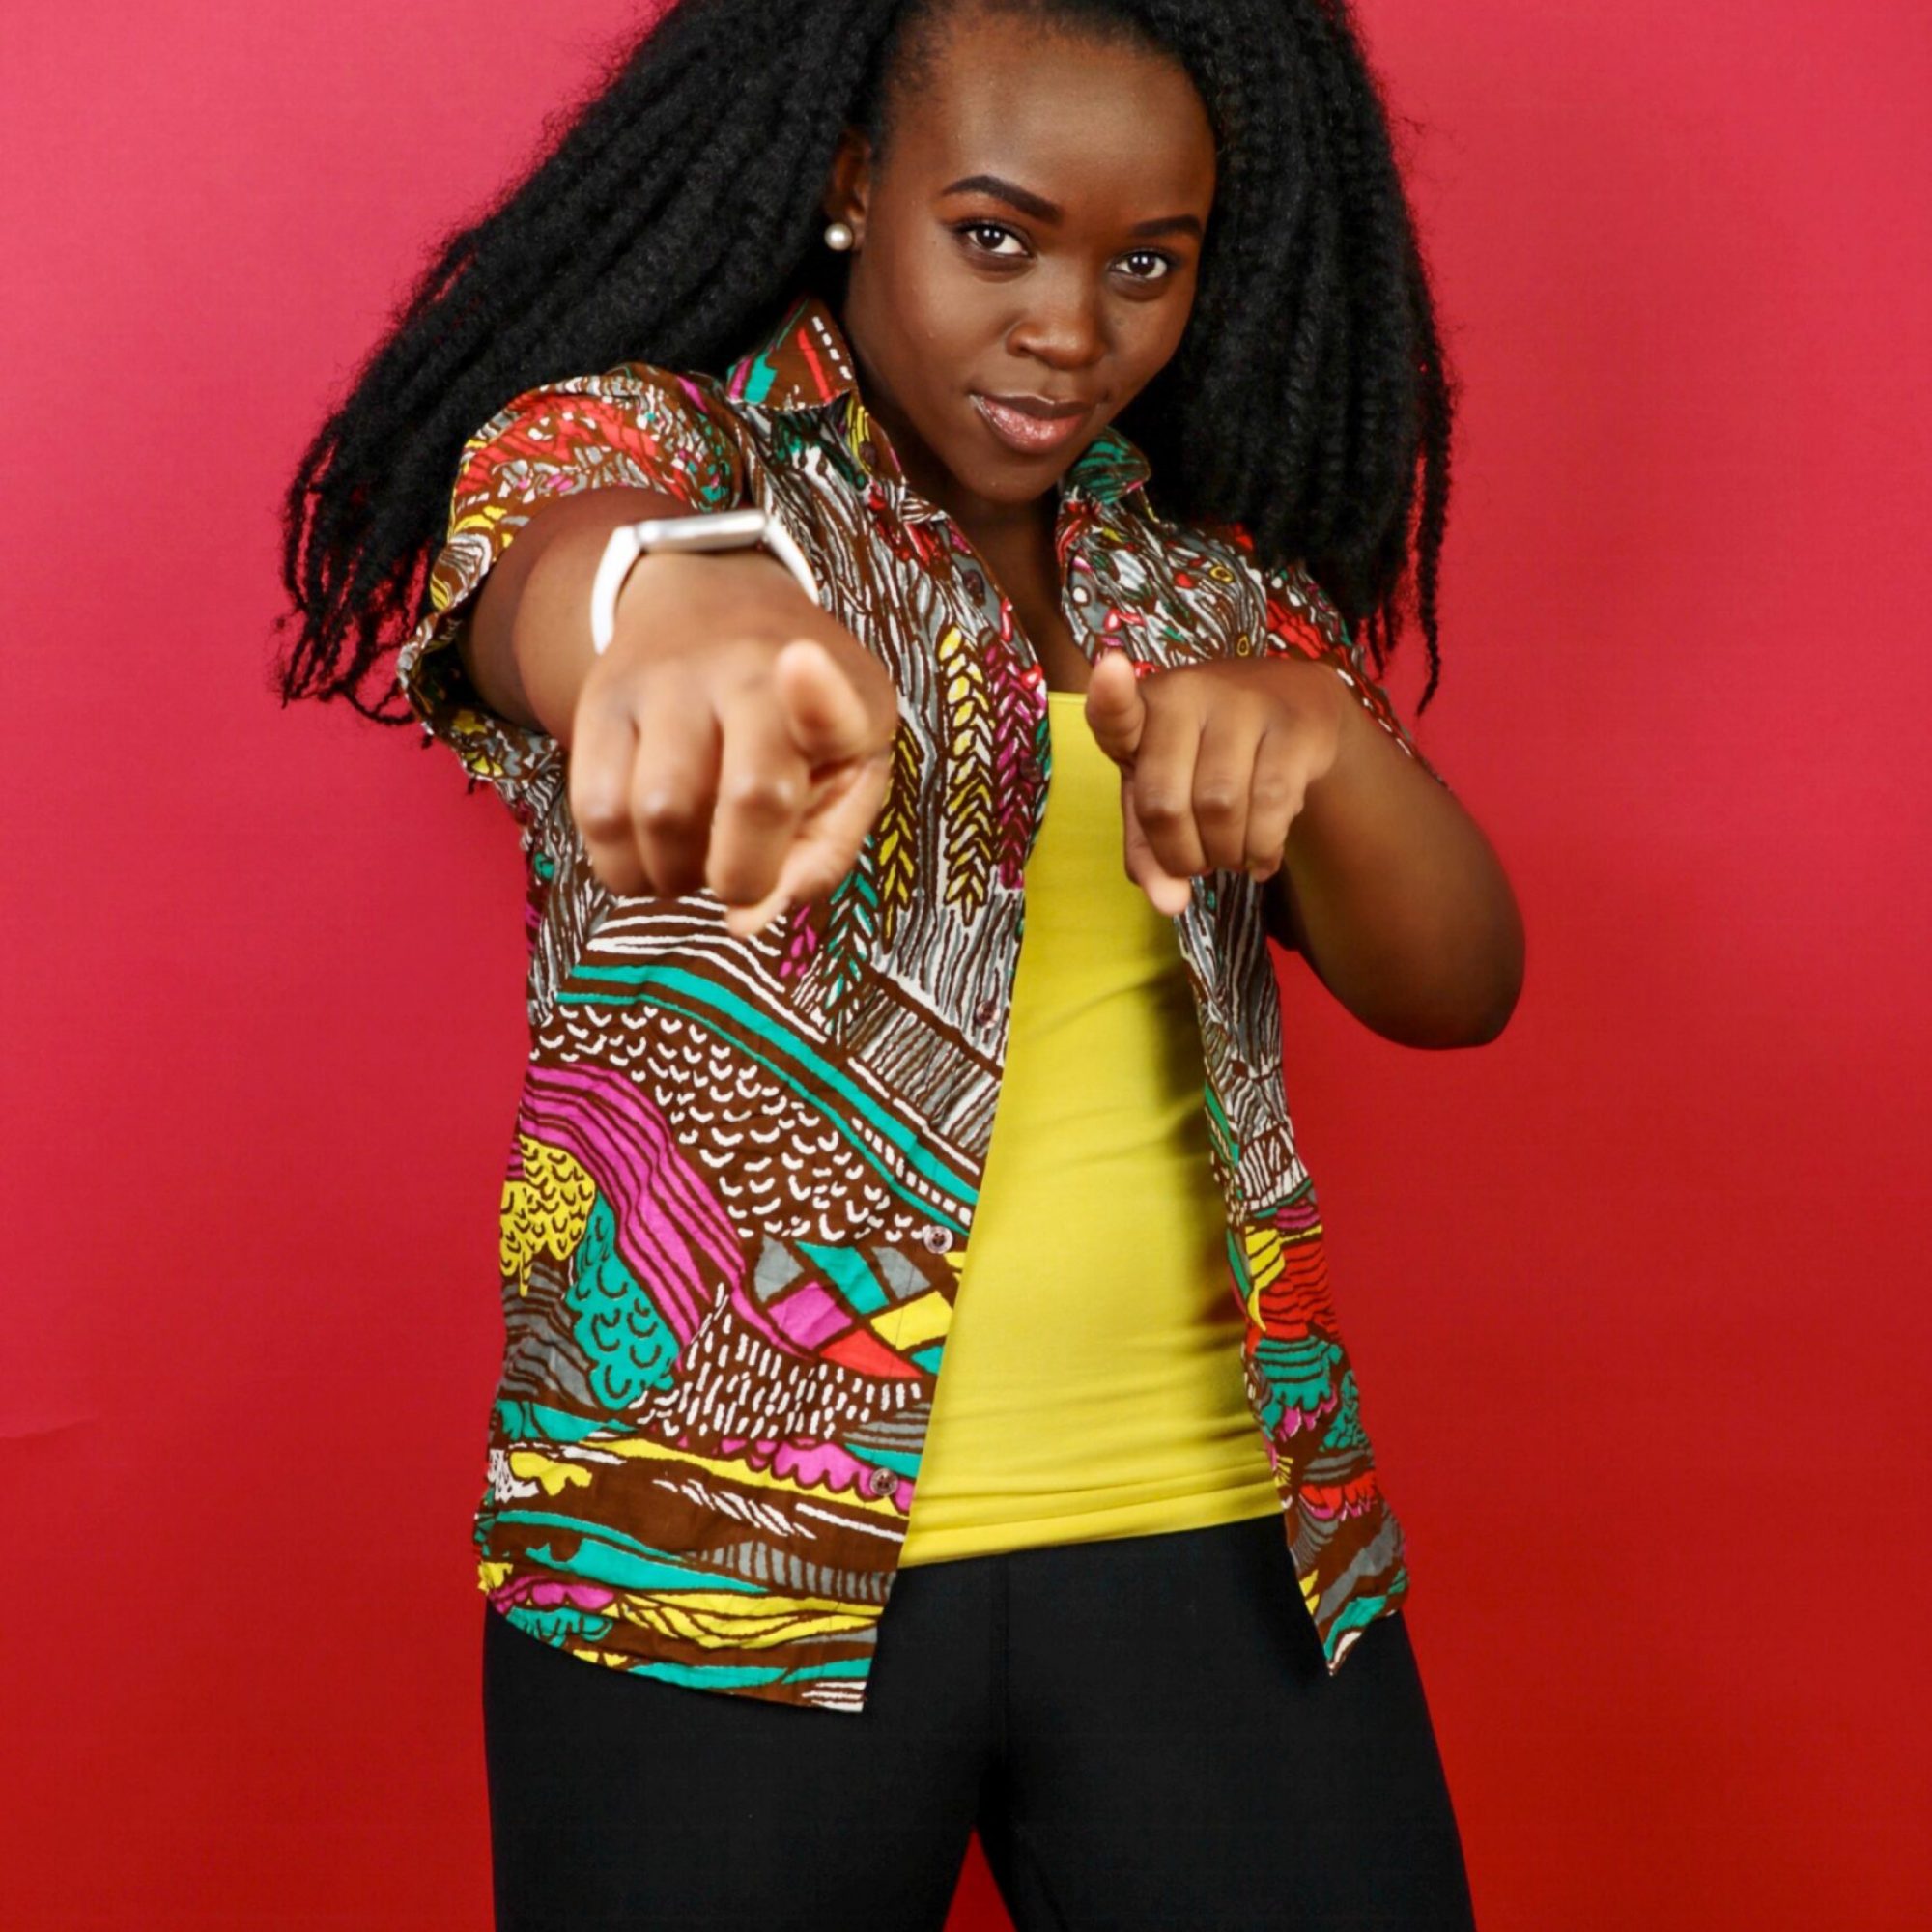 Learn how to dance Afro dance, Hip Hop and Dance Fitness with instructor Bunmi at Salsa With Silvia